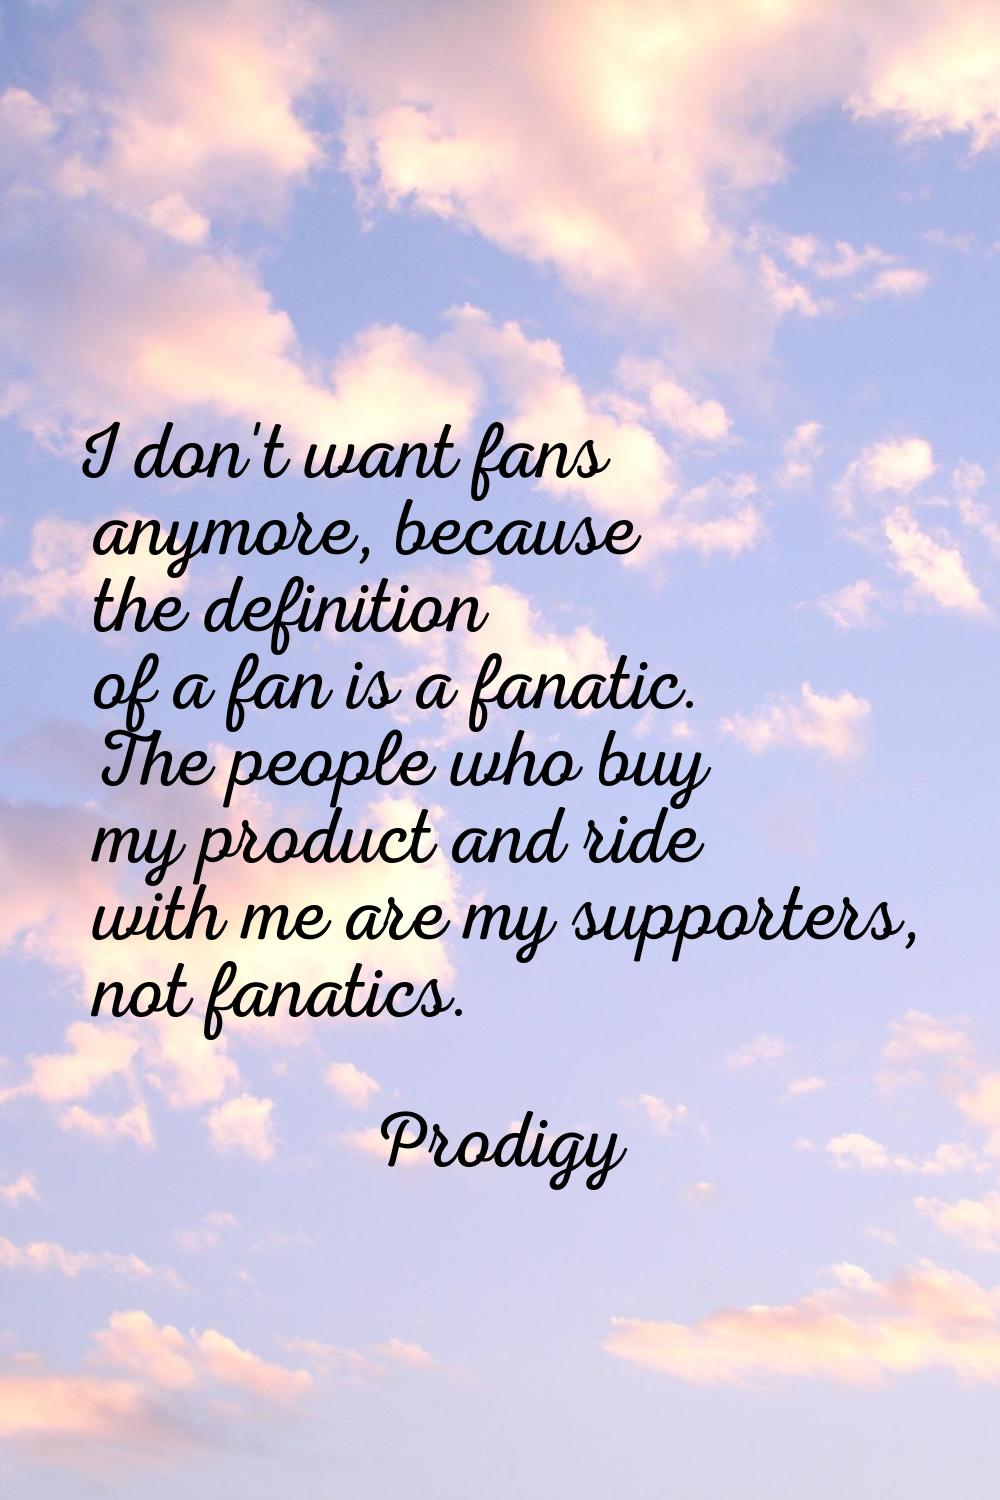 I don't want fans anymore, because the definition of a fan is a fanatic. The people who buy my prod